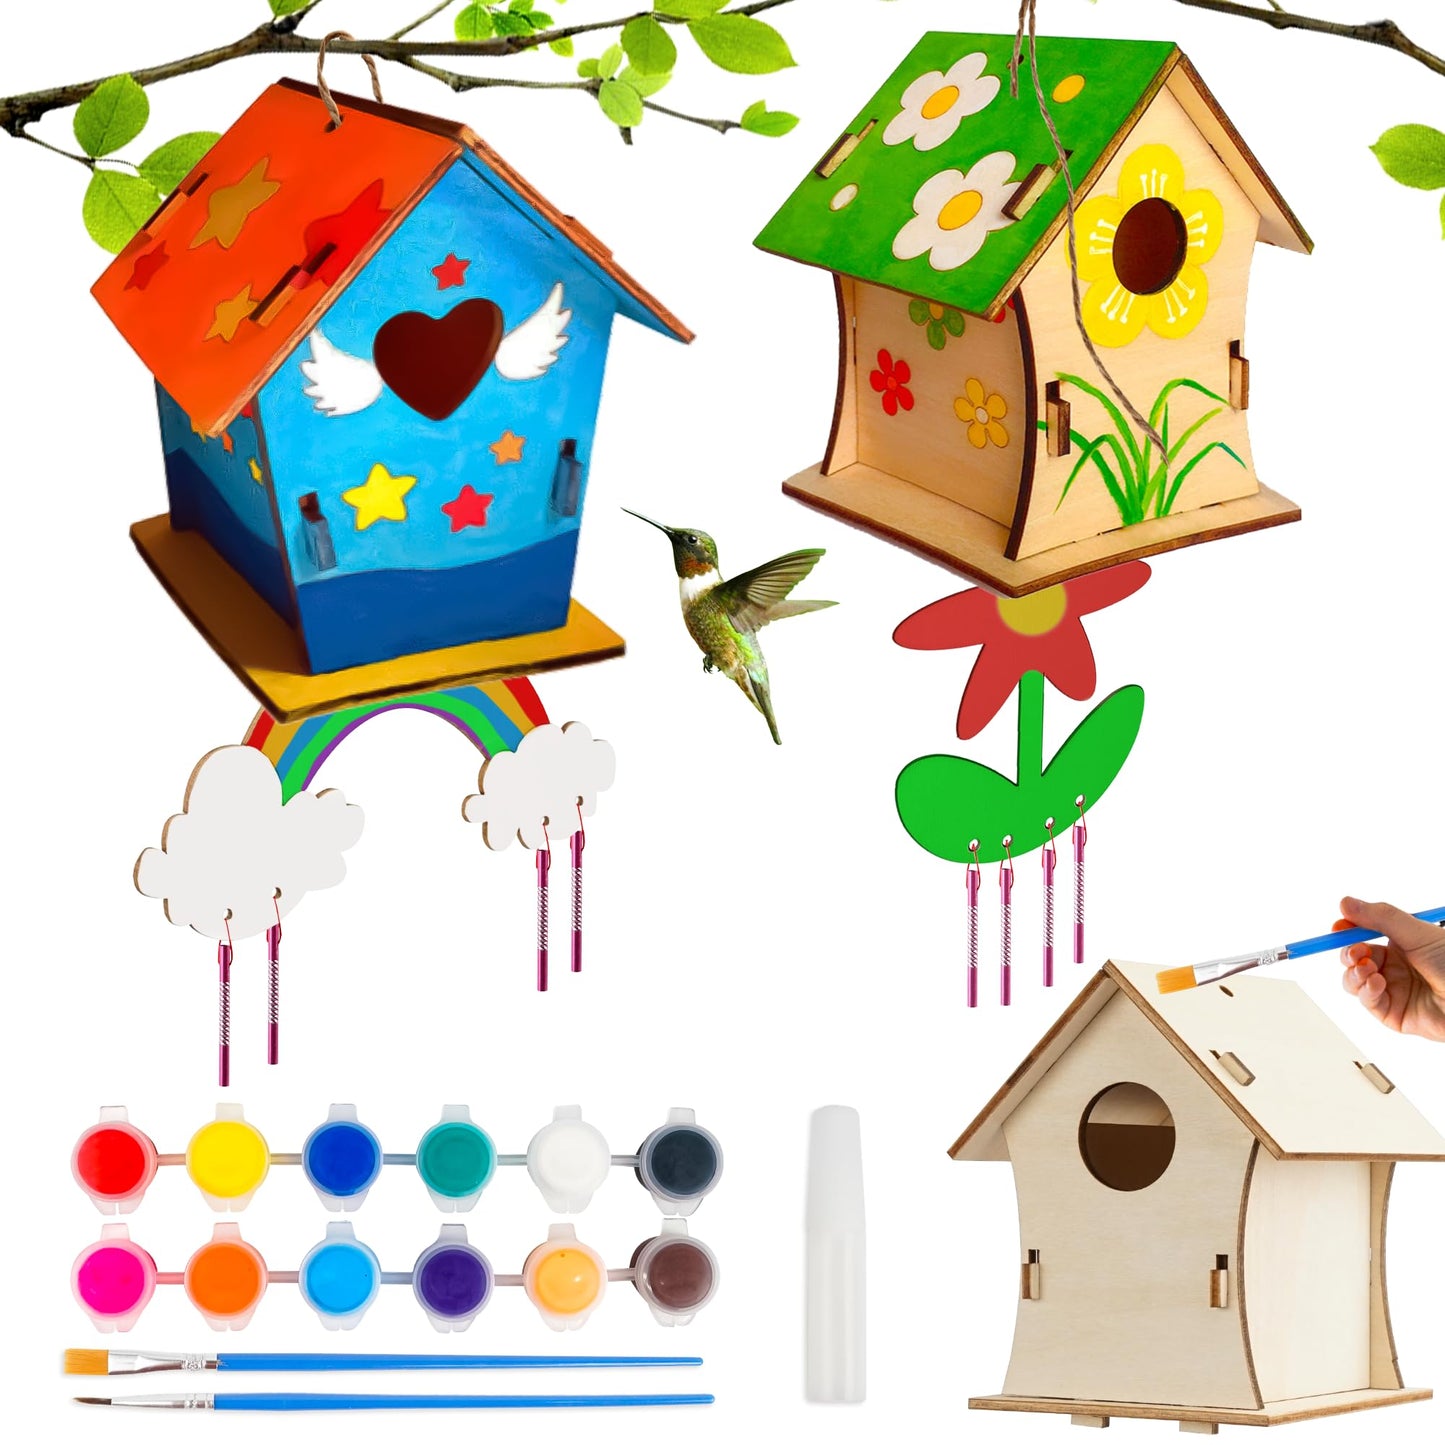 BELLOCHIDDO 2 Pack DIY Birdhouse Wind Chime Kit-Wooden Crafts Arts for Kids to Build and Paint,Craft Kits Includes Paints & Brushes,Halloween Gifts Toys for Girls Boys Toddlers Ages 3-5 4-6 6-8 8-12